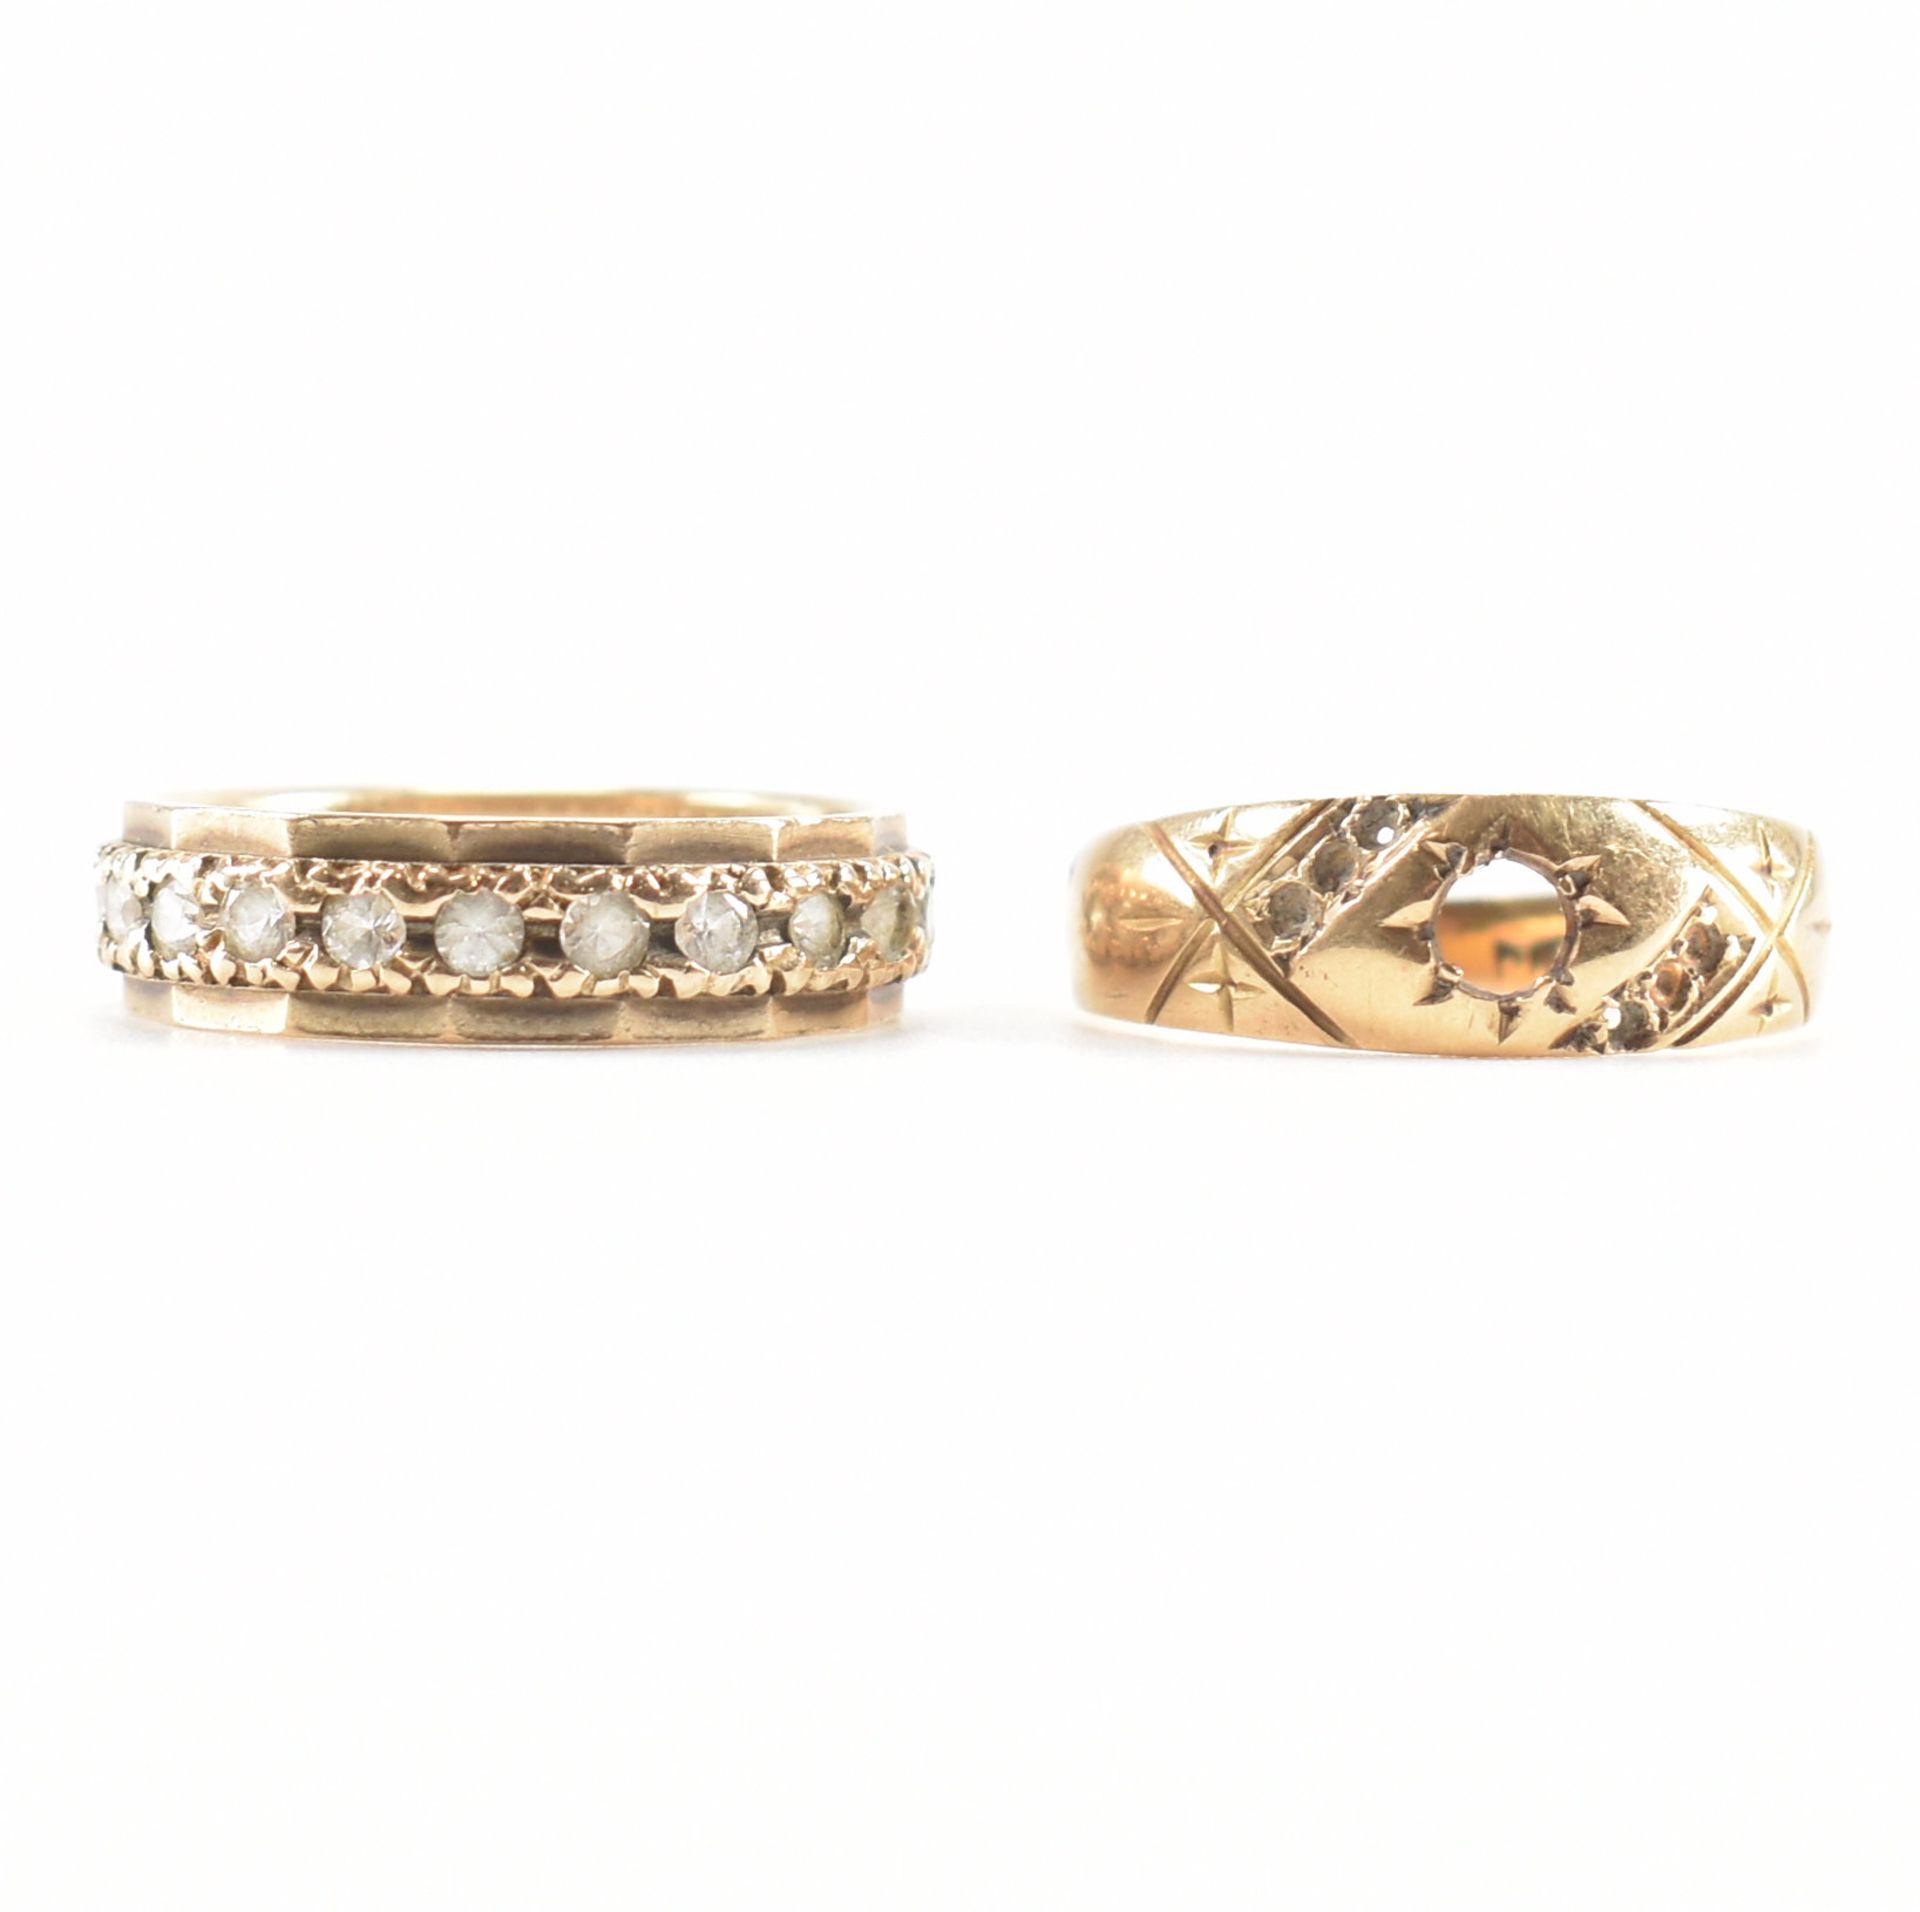 TWO 20TH CENTURY GOLD RING MOUNTS